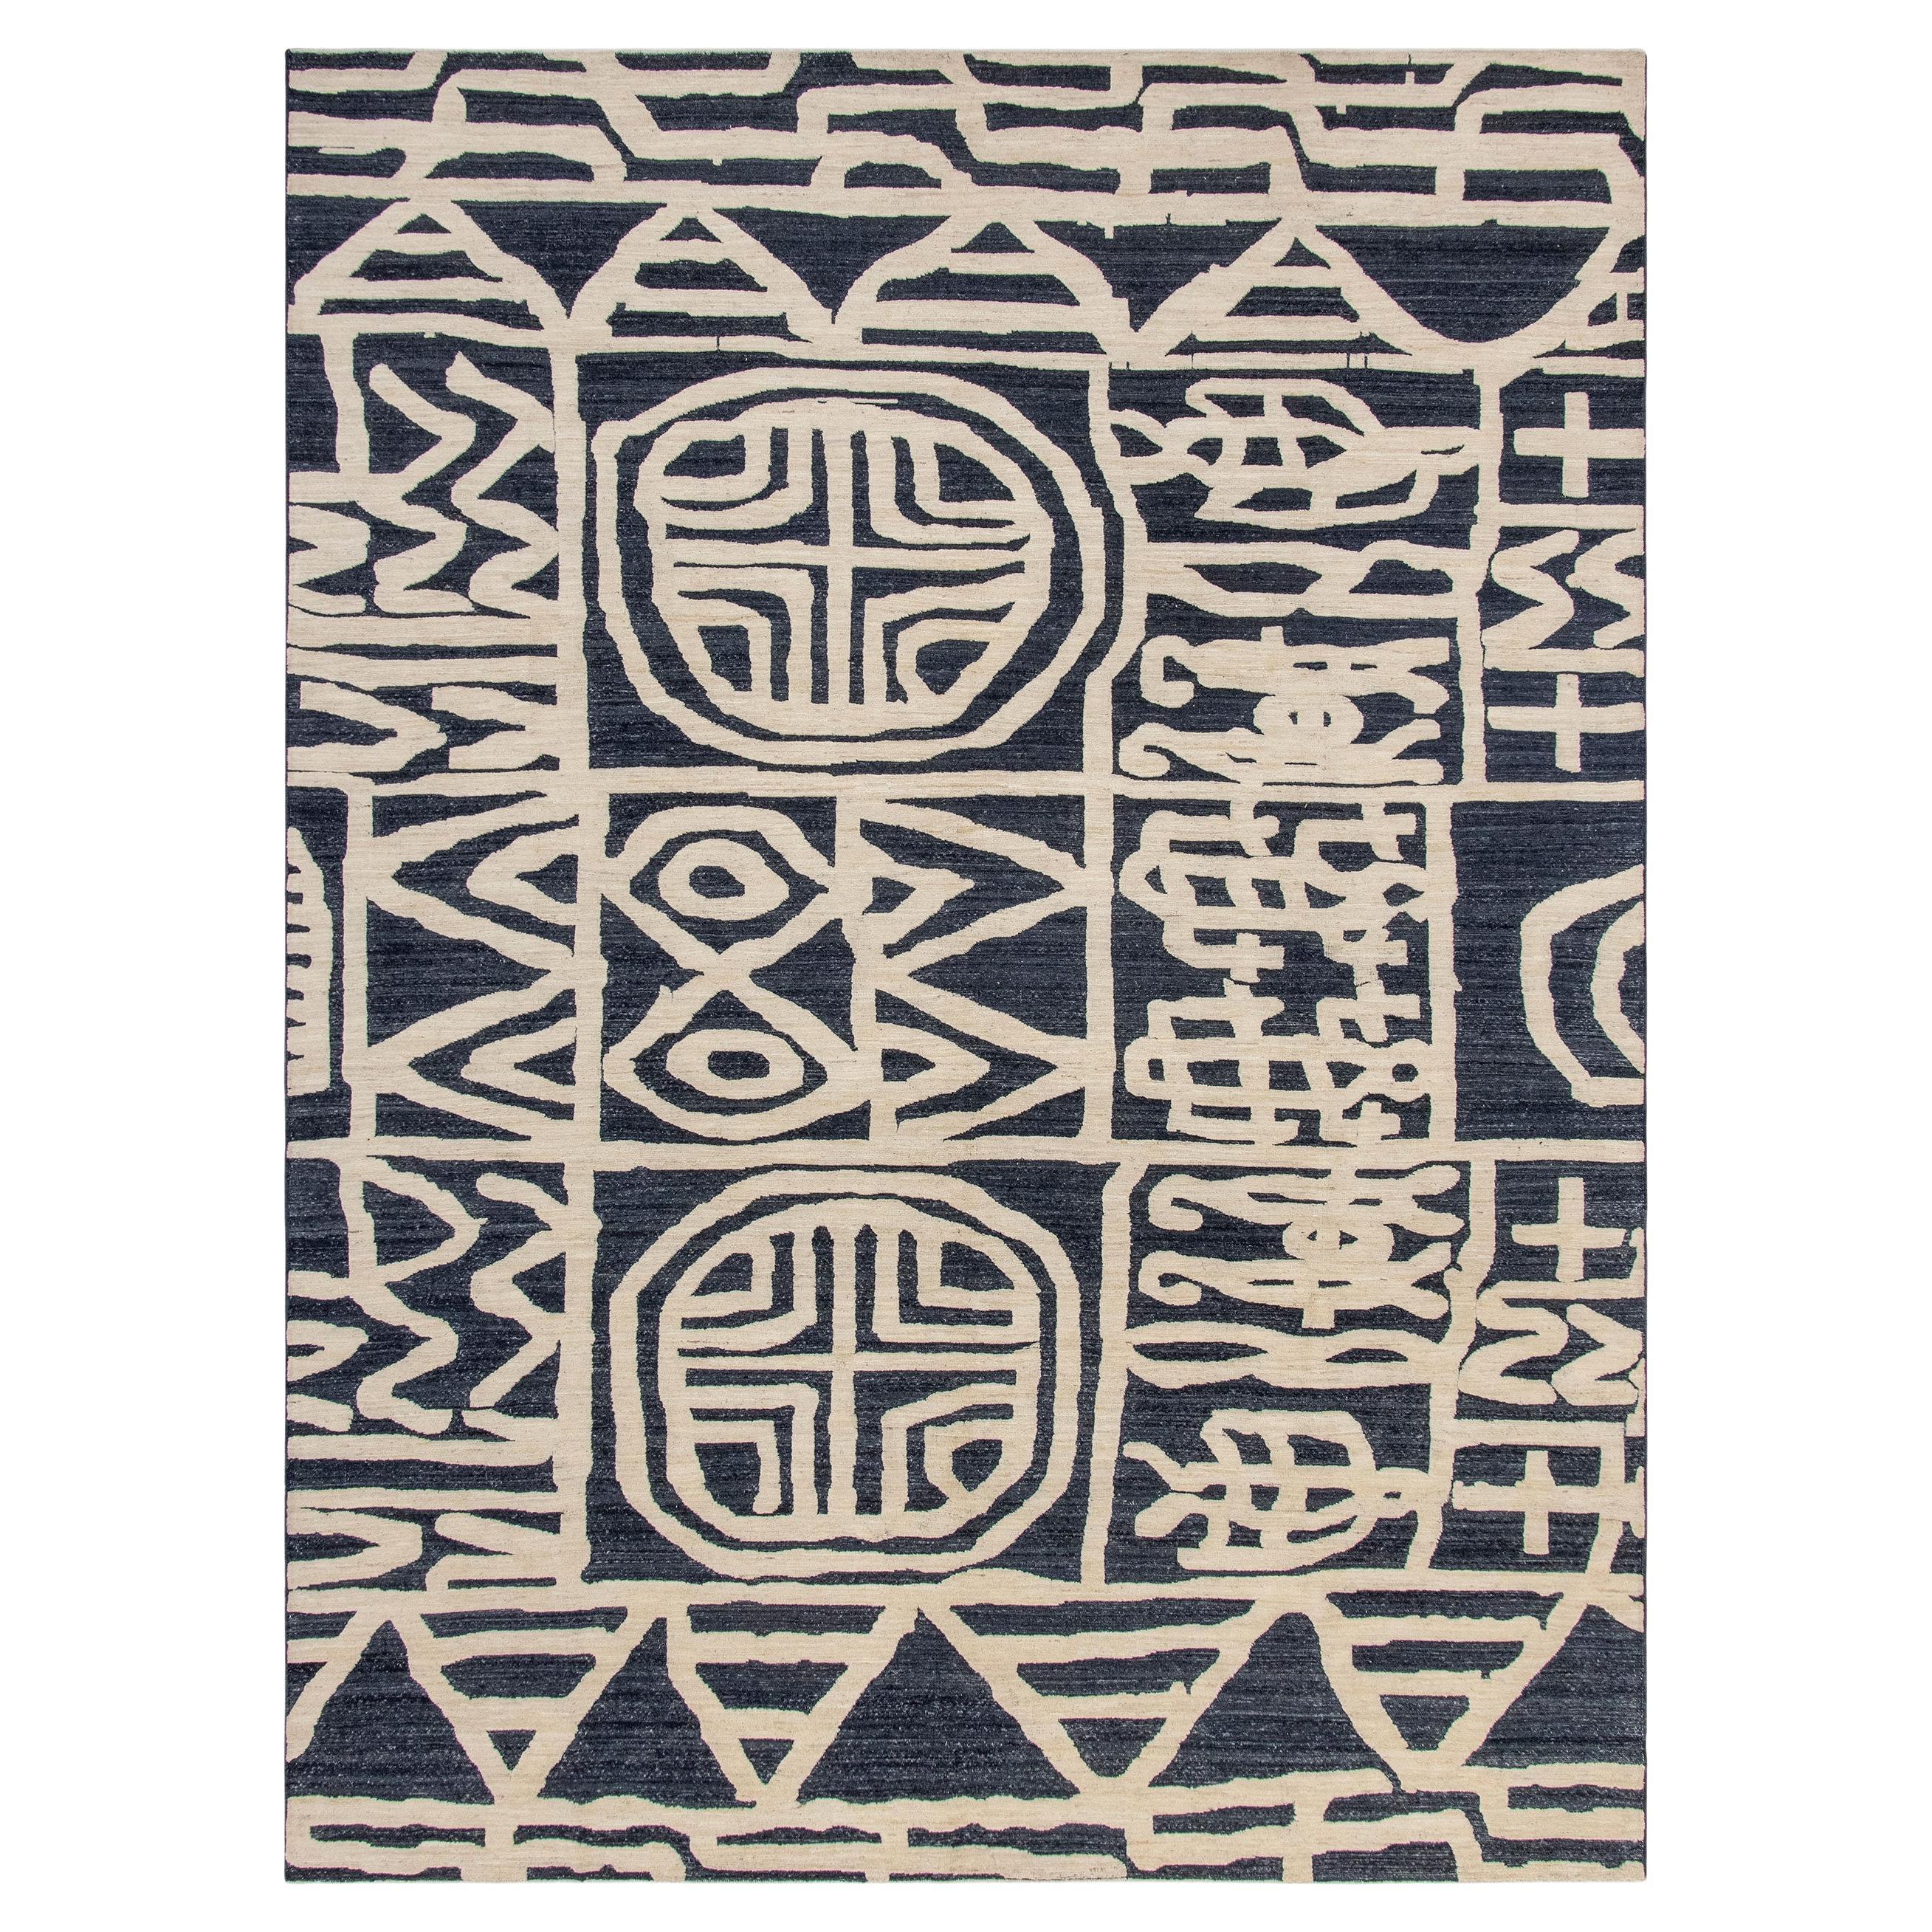 Amadi Congo Collection Town Square Rug For At 1stdibs